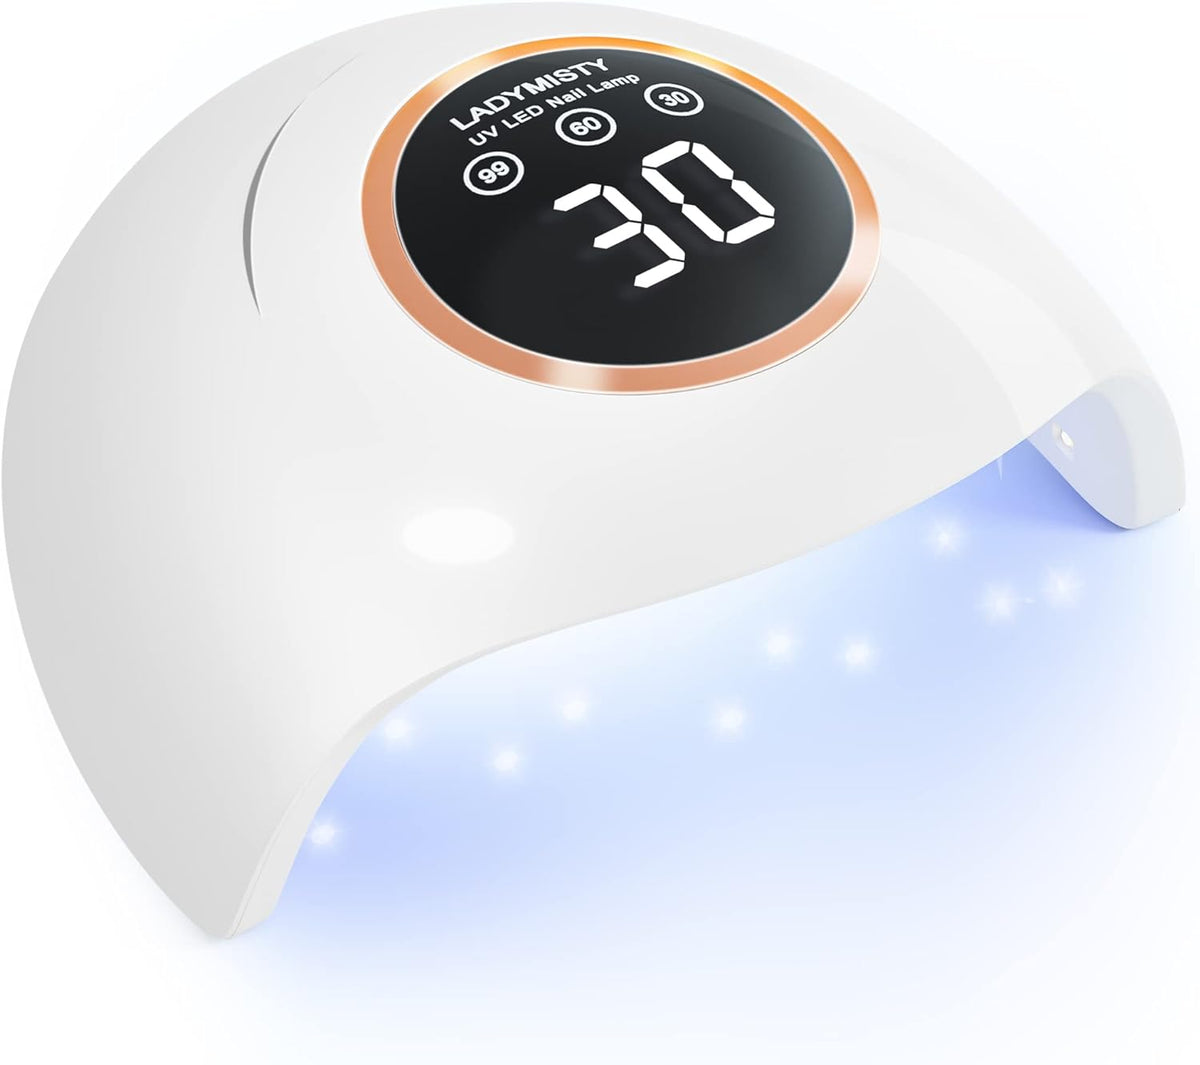 72W UV LED Nail Lamp Light Dryer for Nails Gel Polish with 18 Beads 3 Timer Setting & LCD Touch Display Screen